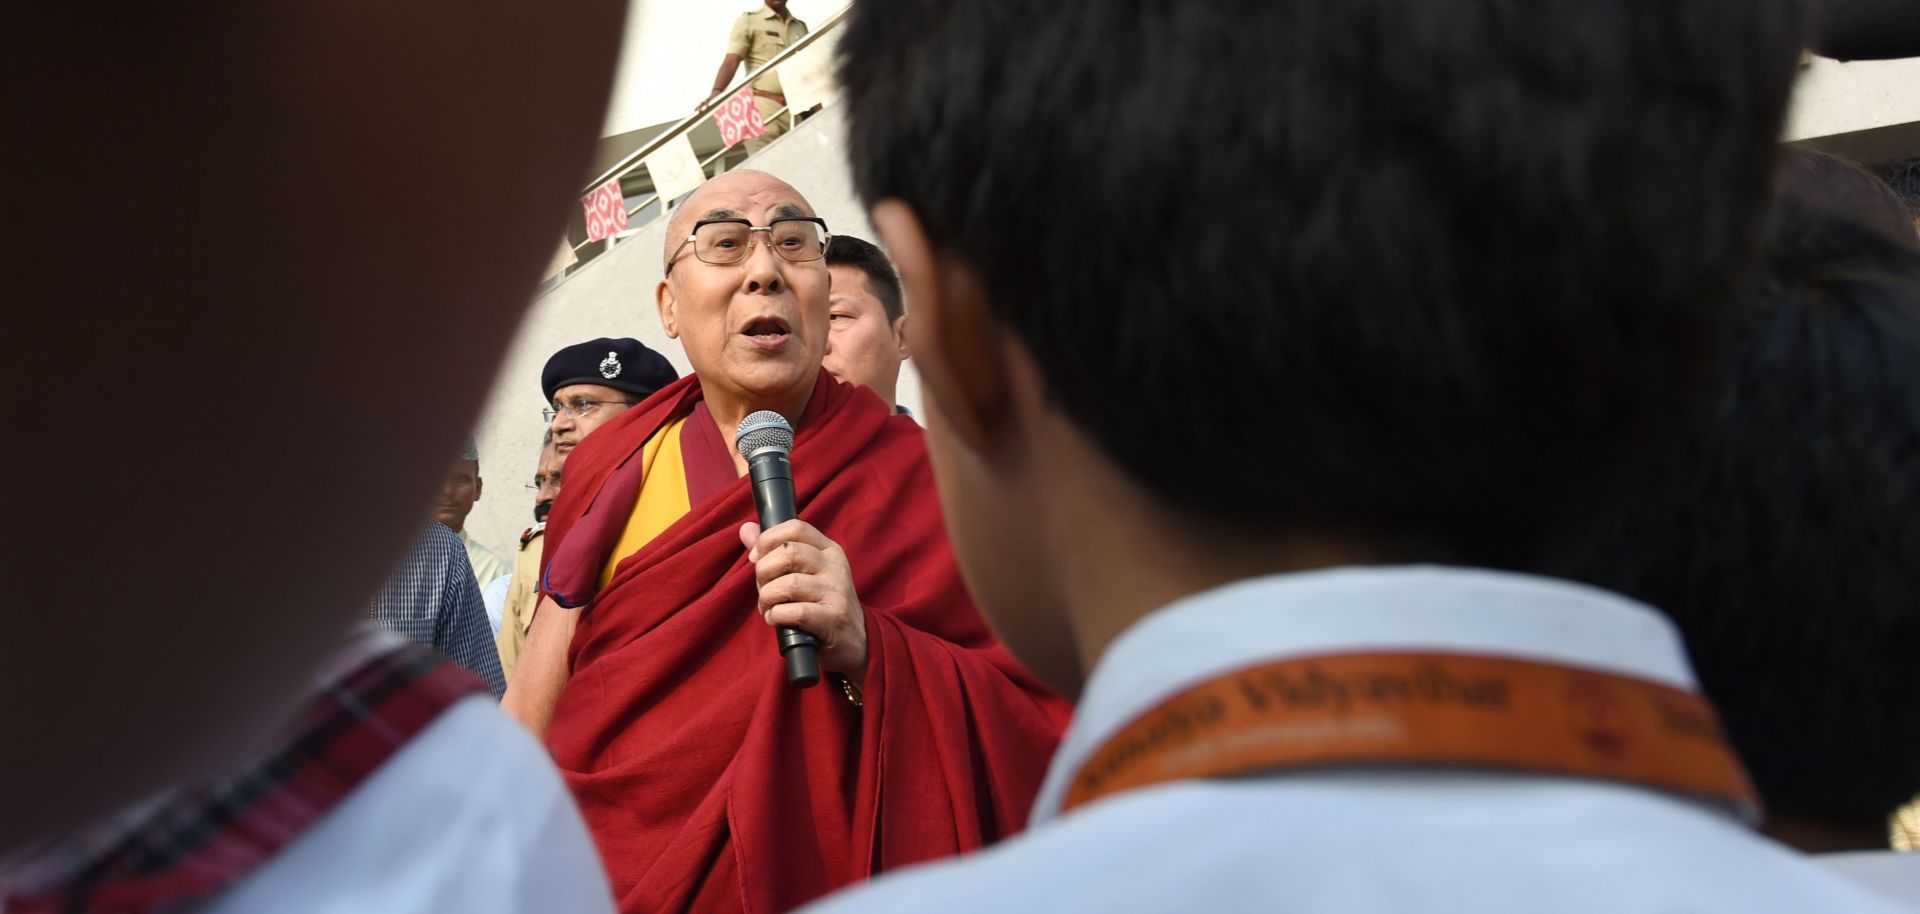 The Dalai Lama addresses students in Mumbai, India, on Dec. 8, 2017. How Beijing and the aging spiritual leader approach their differences will shape the future course of the exiled Tibetan government and the regional balance of power between China and India.